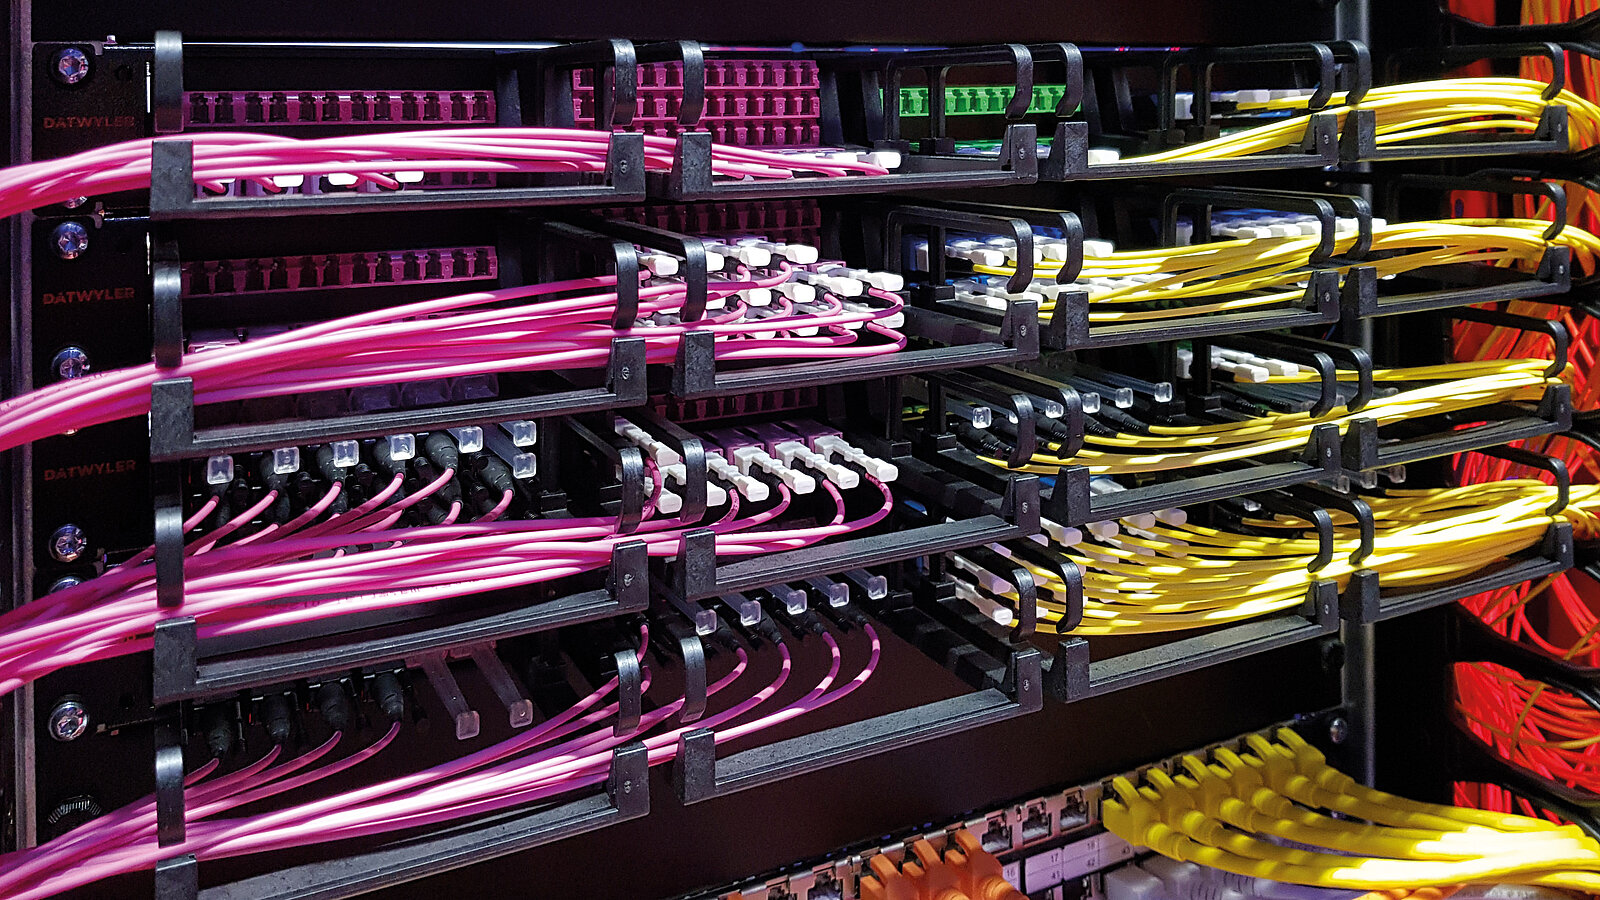 HD-DCS - the high-density cabling solution from Datwyler IT